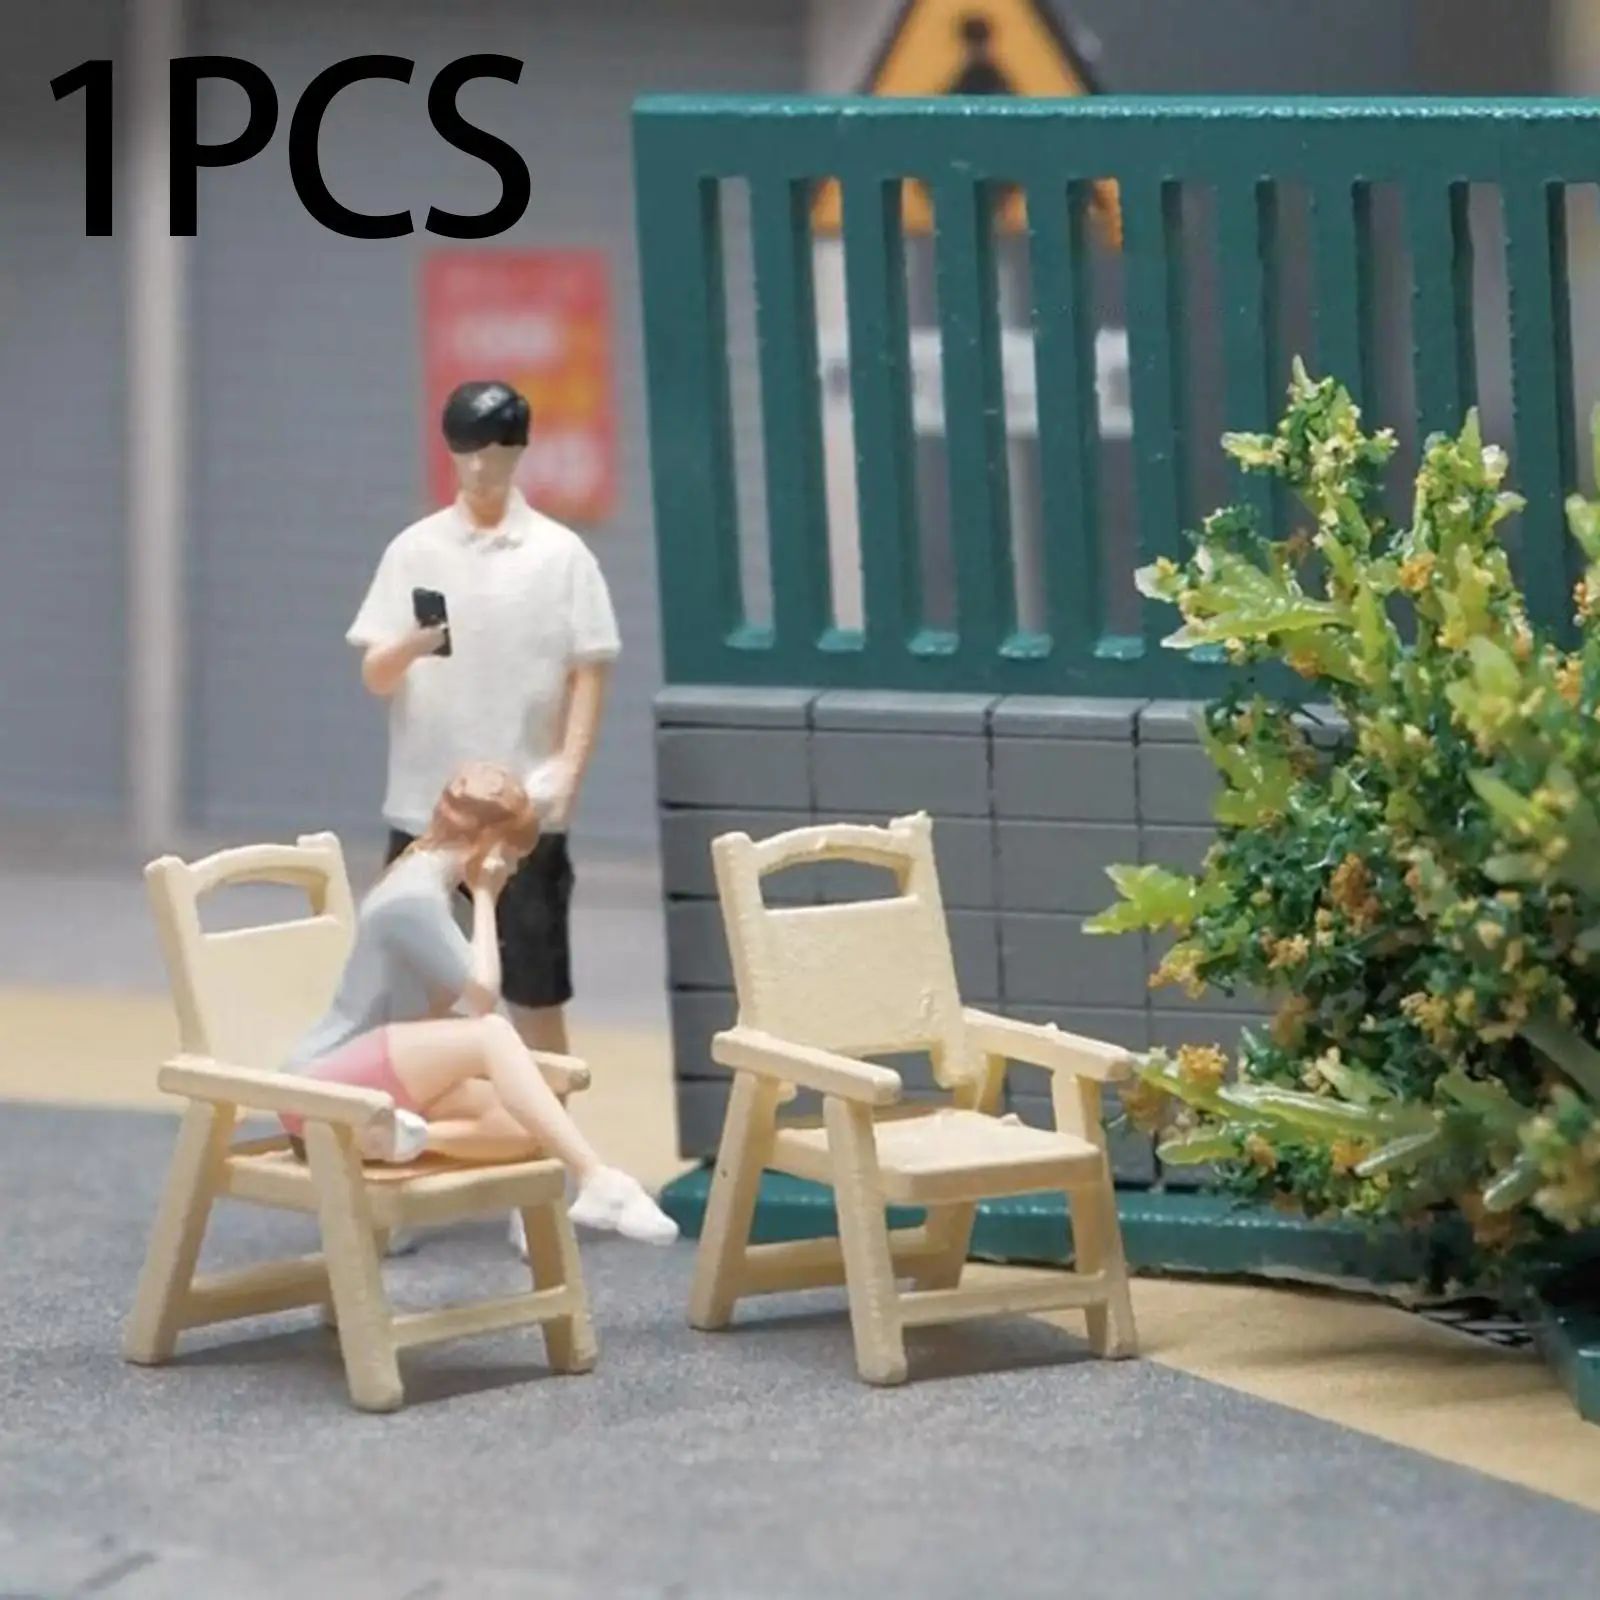 Miniature figure/64 Scale Tiny People People Figure Doll Toy for Dioramas